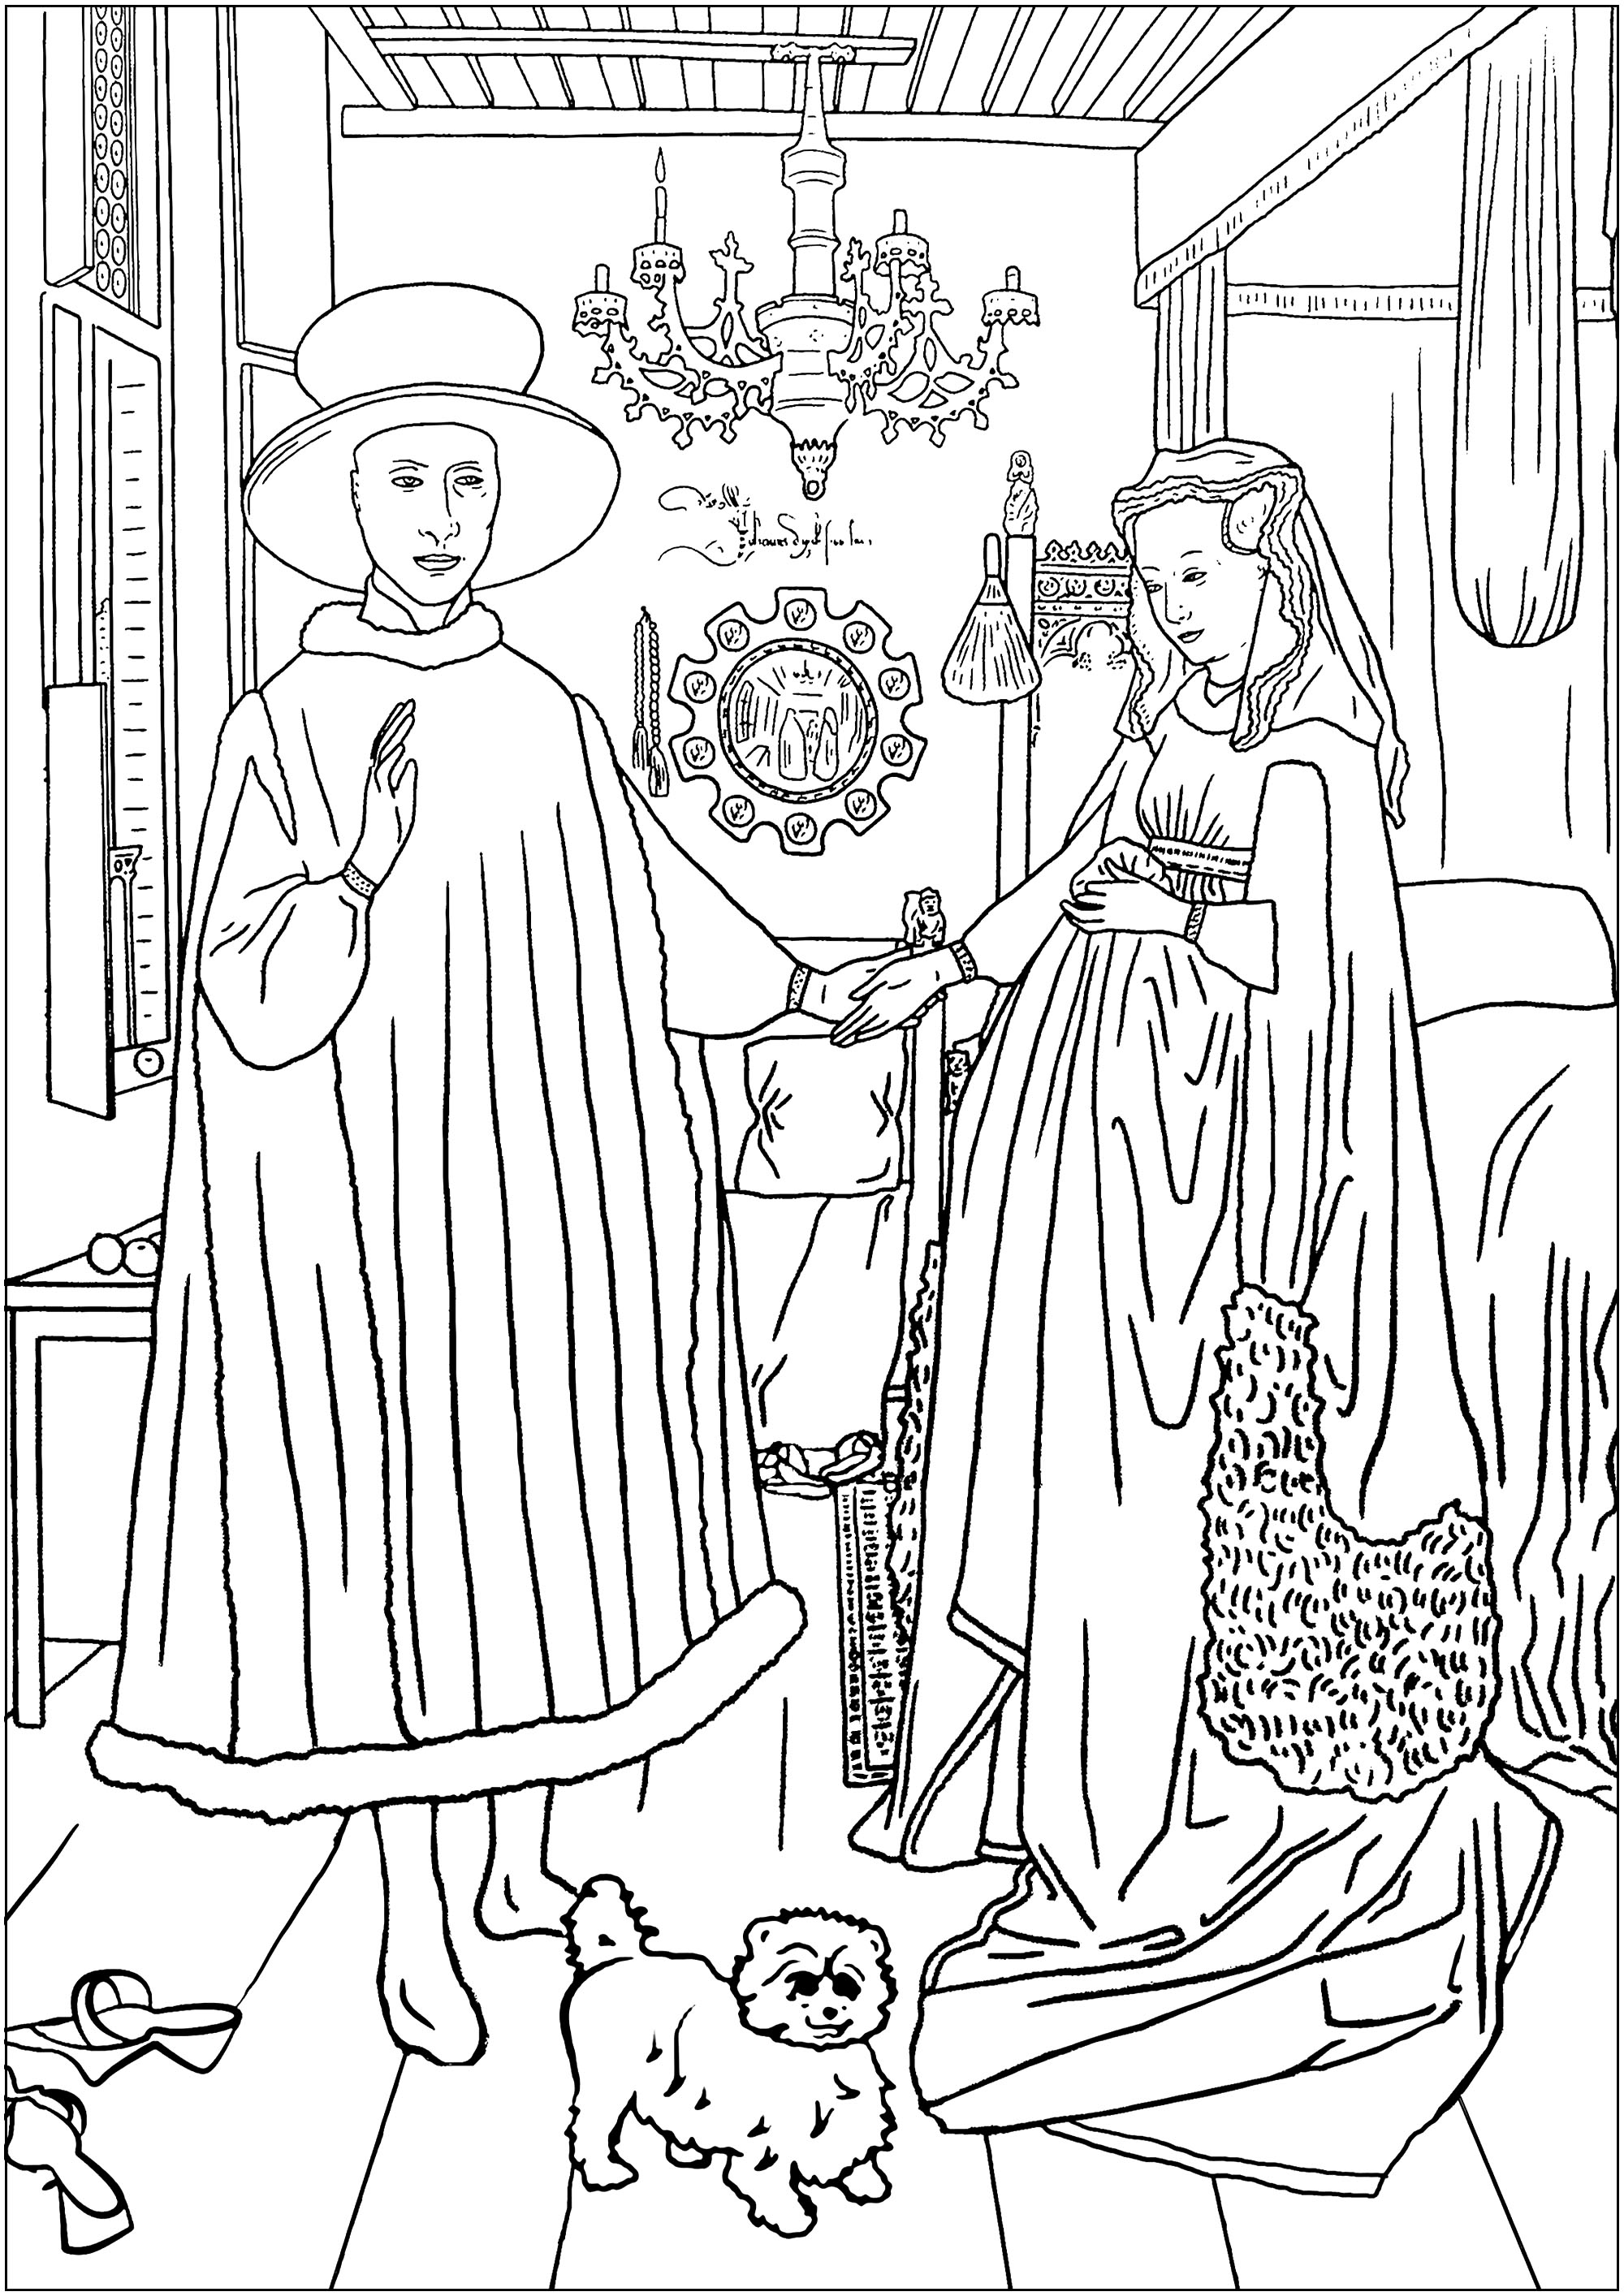 Coloring page created from The Arnoflini Portrait by Jan Van Eyck